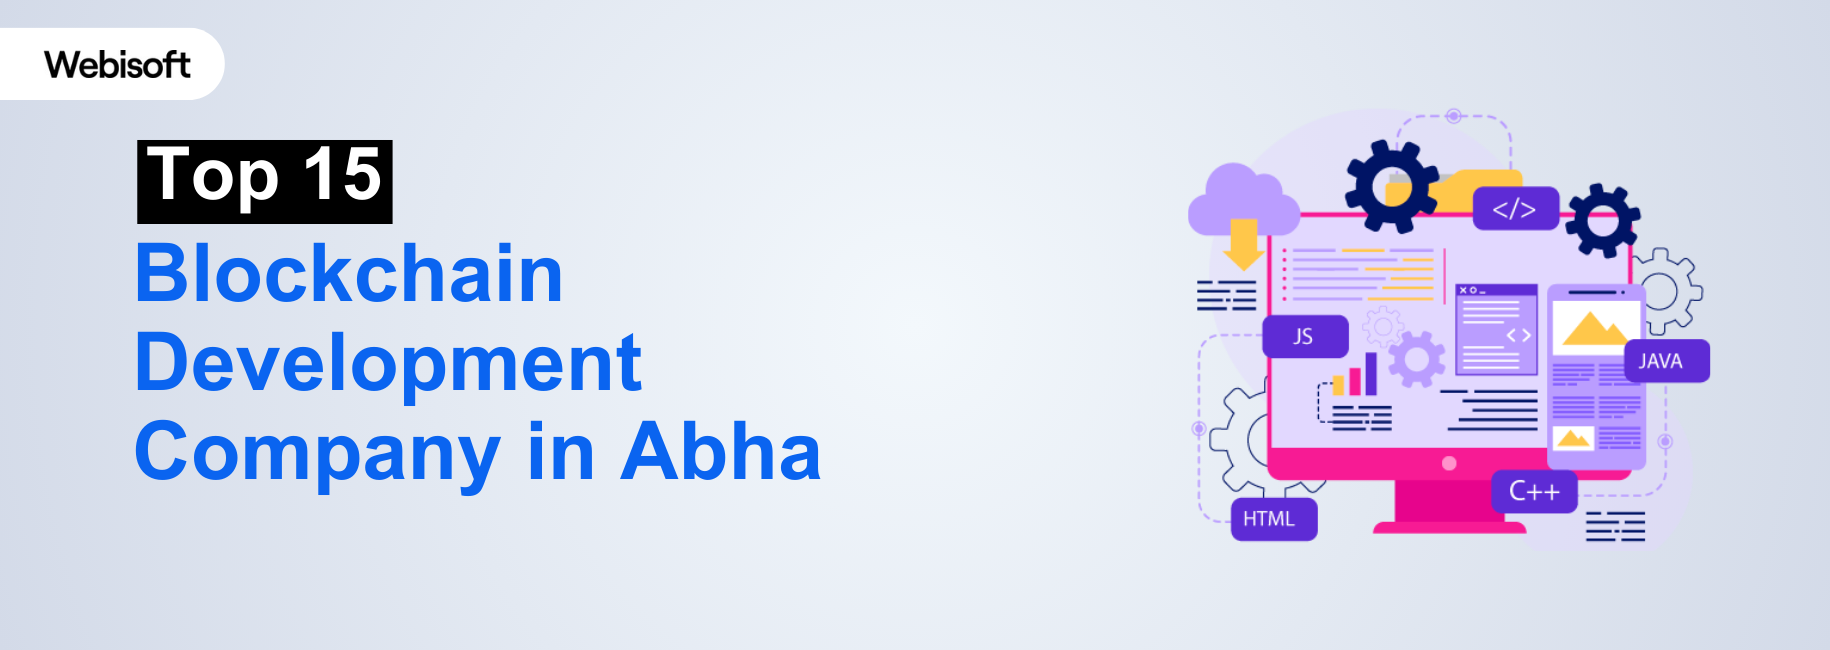 Top 15 Blockchain Development Company in Abha for Powering Business Transformation